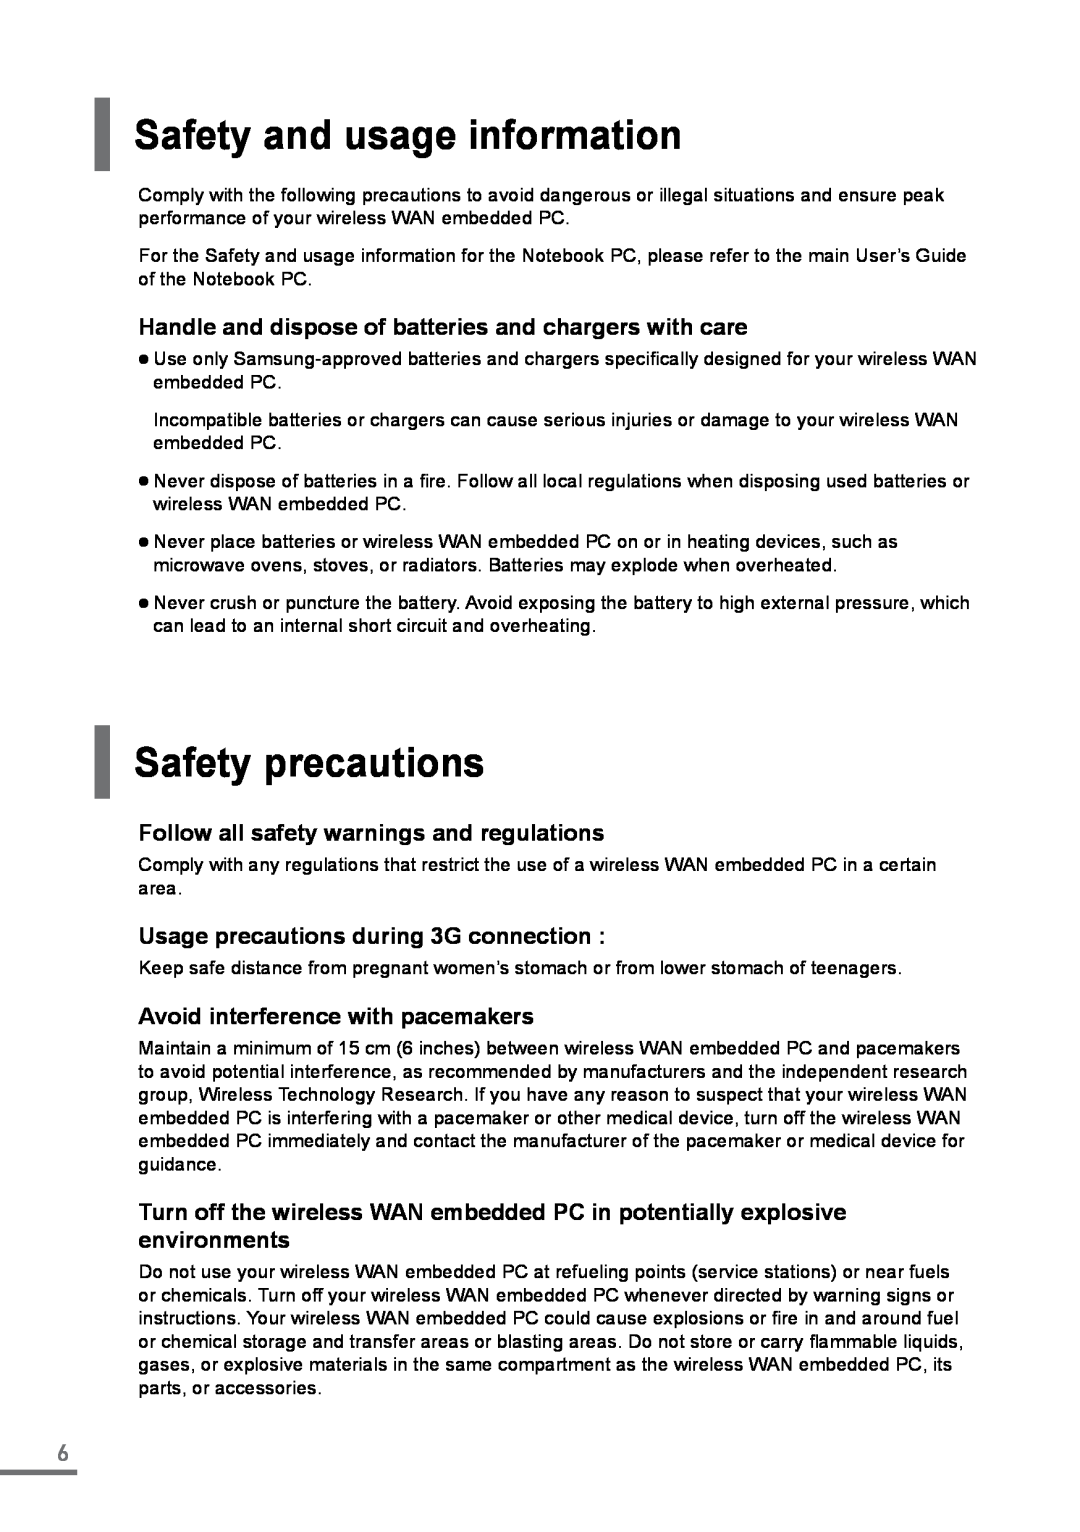 Samsung XE500C21-AZ2FR manual Safety and usage information, Safety precautions, Follow all safety warnings and regulations 